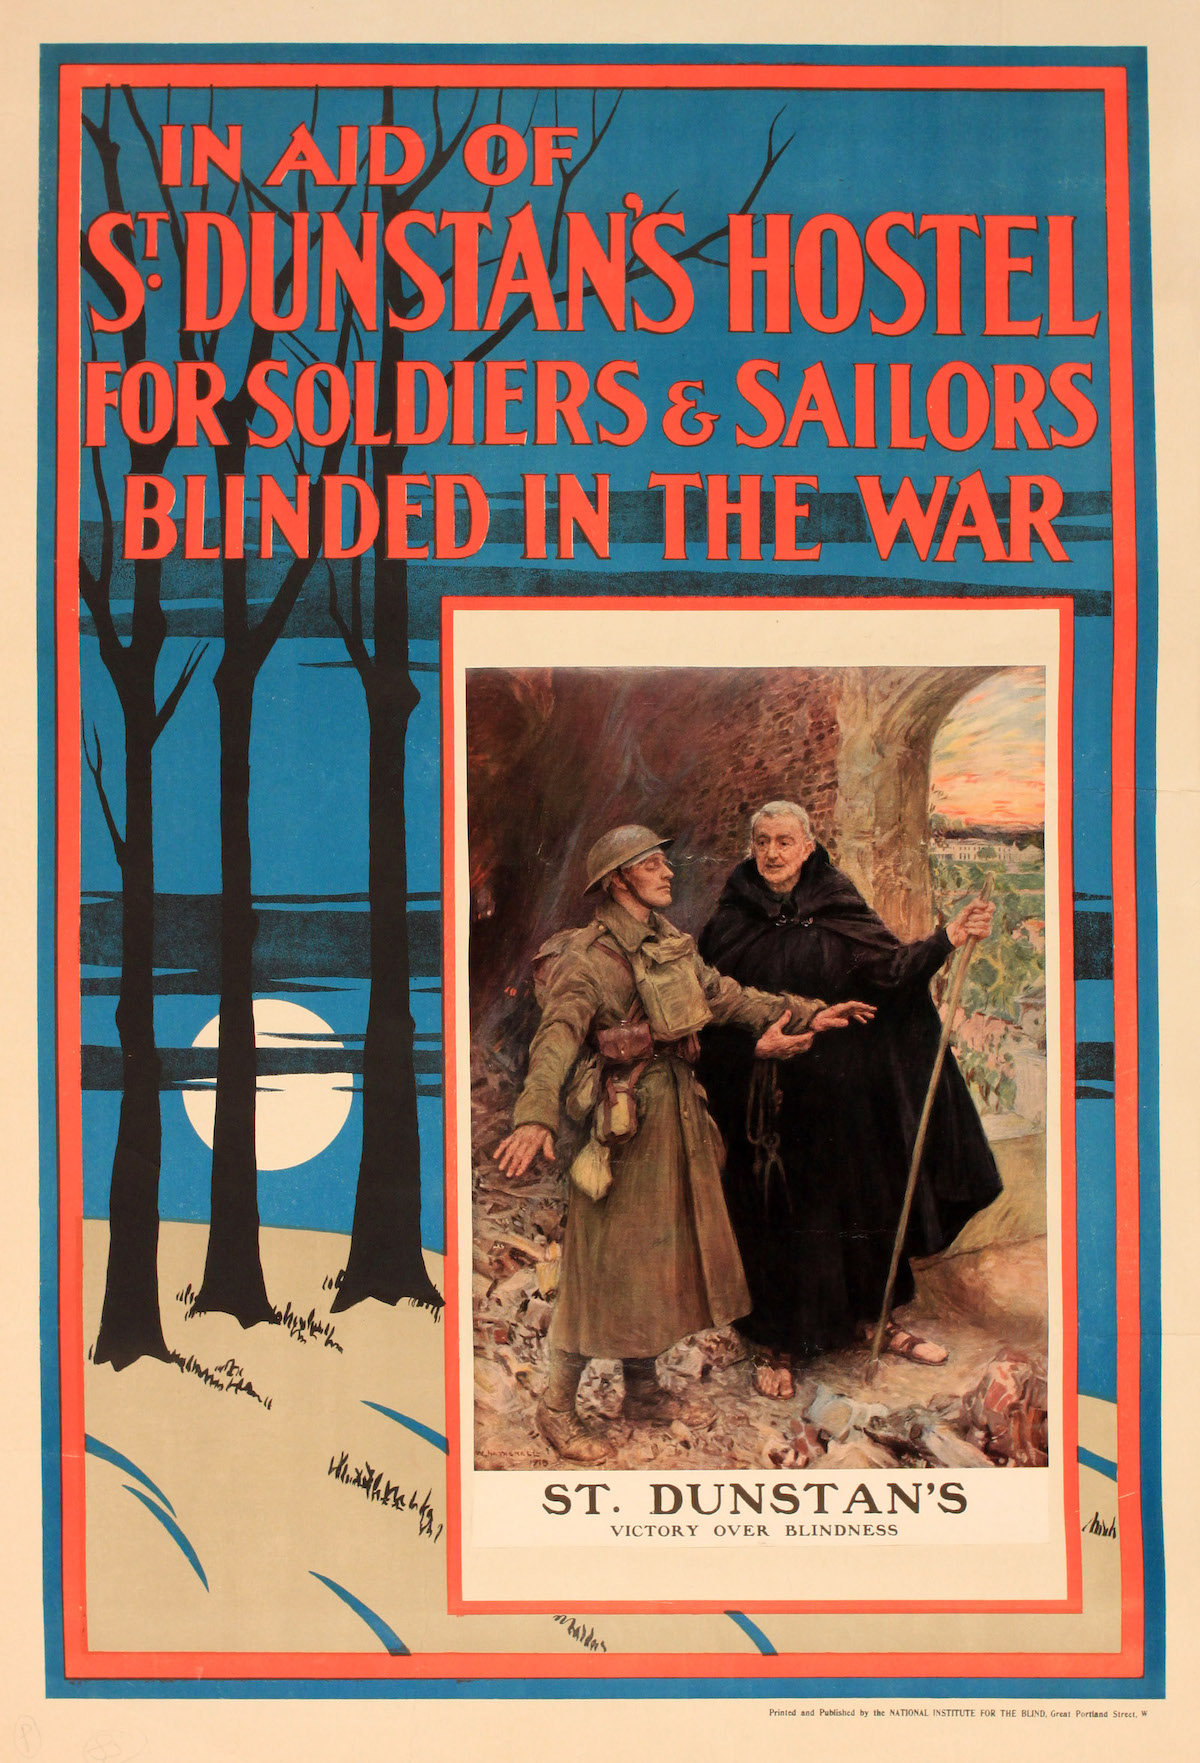 Fundraising poster for St Dunstan’s Hostel for Soldiers & Sailors Blinded in the War, c.1920. Mary Evans Picture Library/Onslow Auctions Limited; Blinded Soldiers and Sailors Gift Book, 1915.